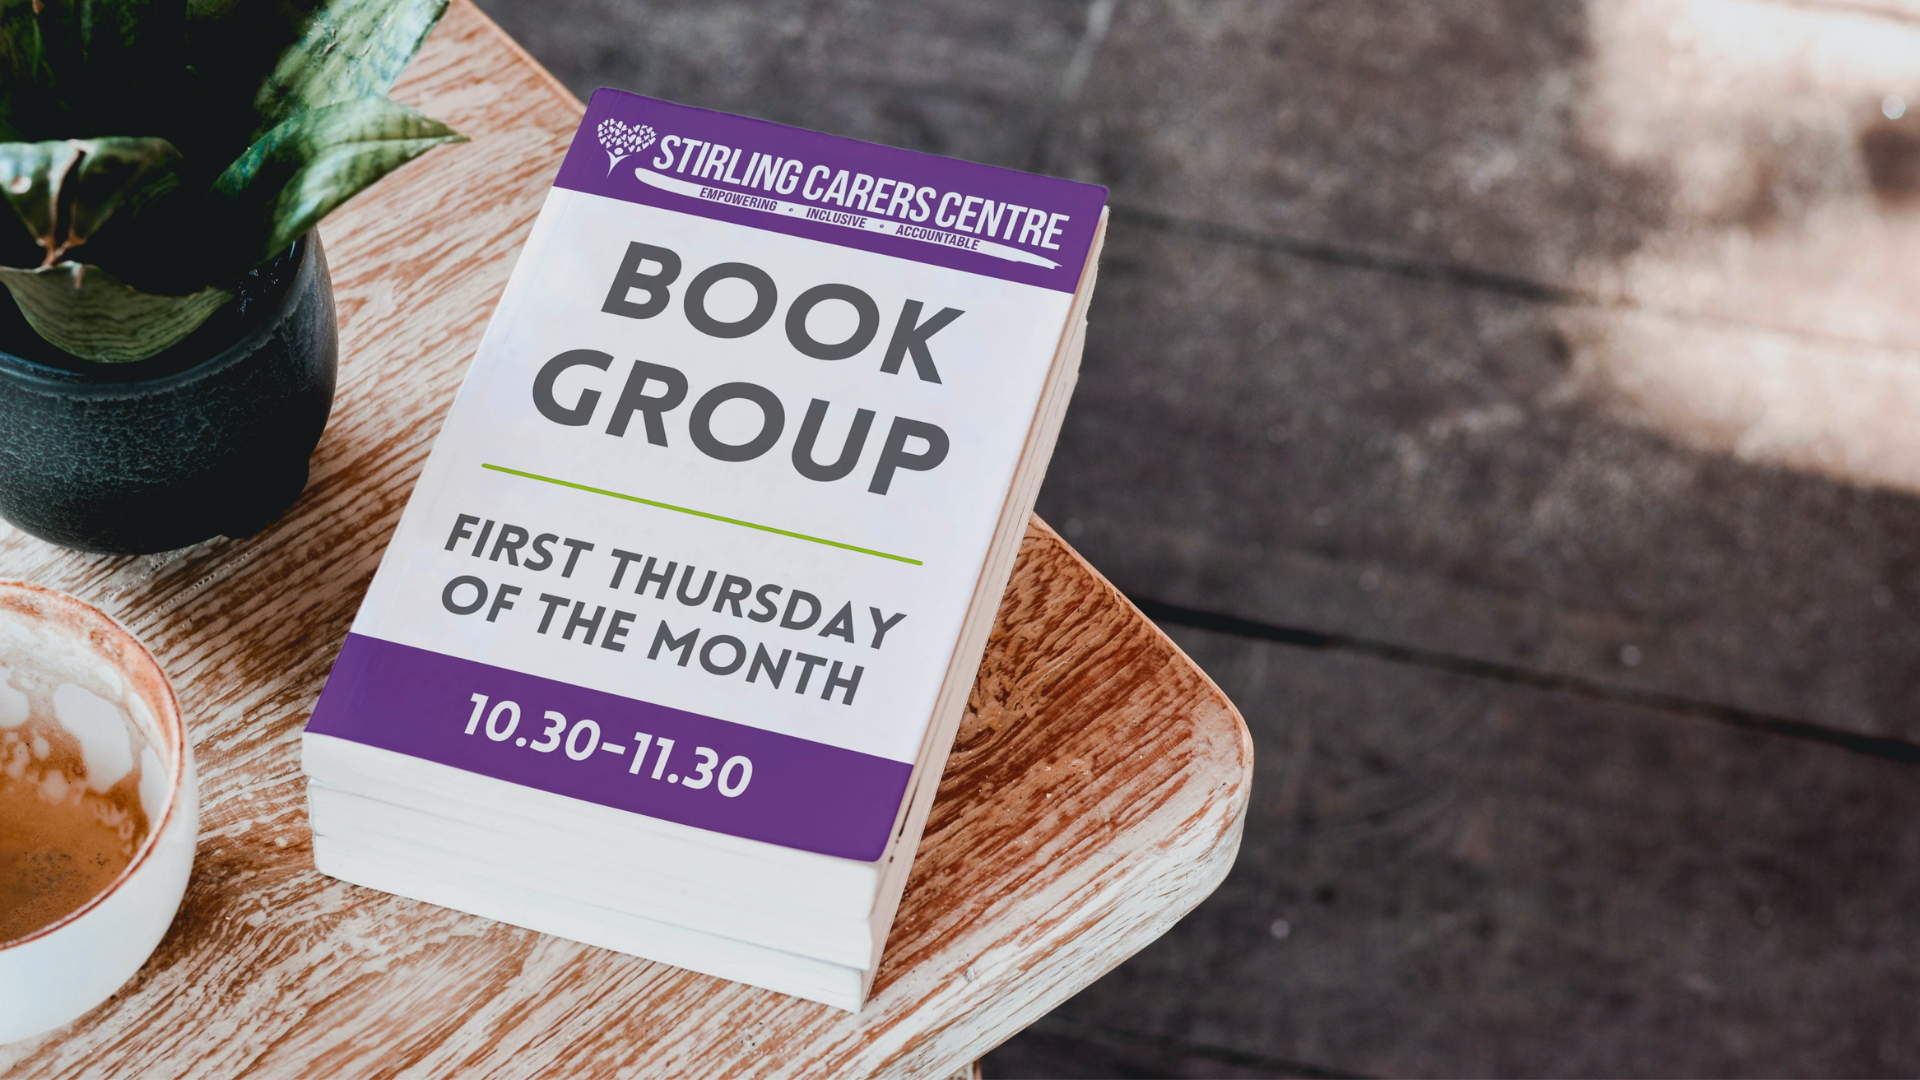 Book Group advert. Book Group; First Thursday of the month; 10.30 - 11.30am